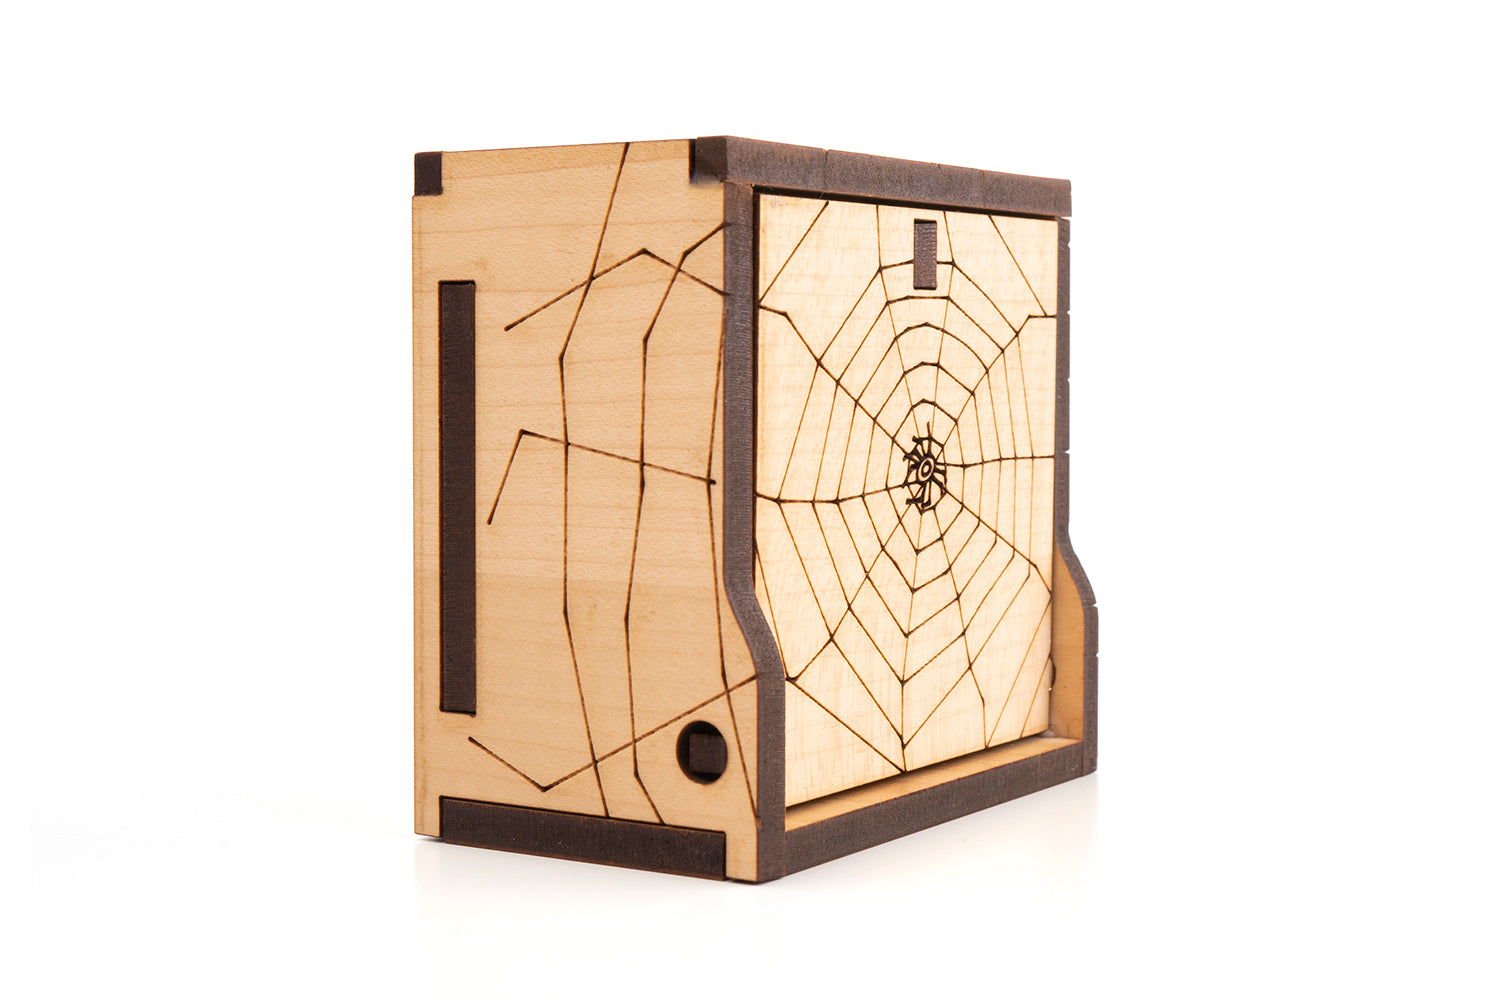 Secret Opening Puzzle Box - Tricky Wooden Puzzle Box